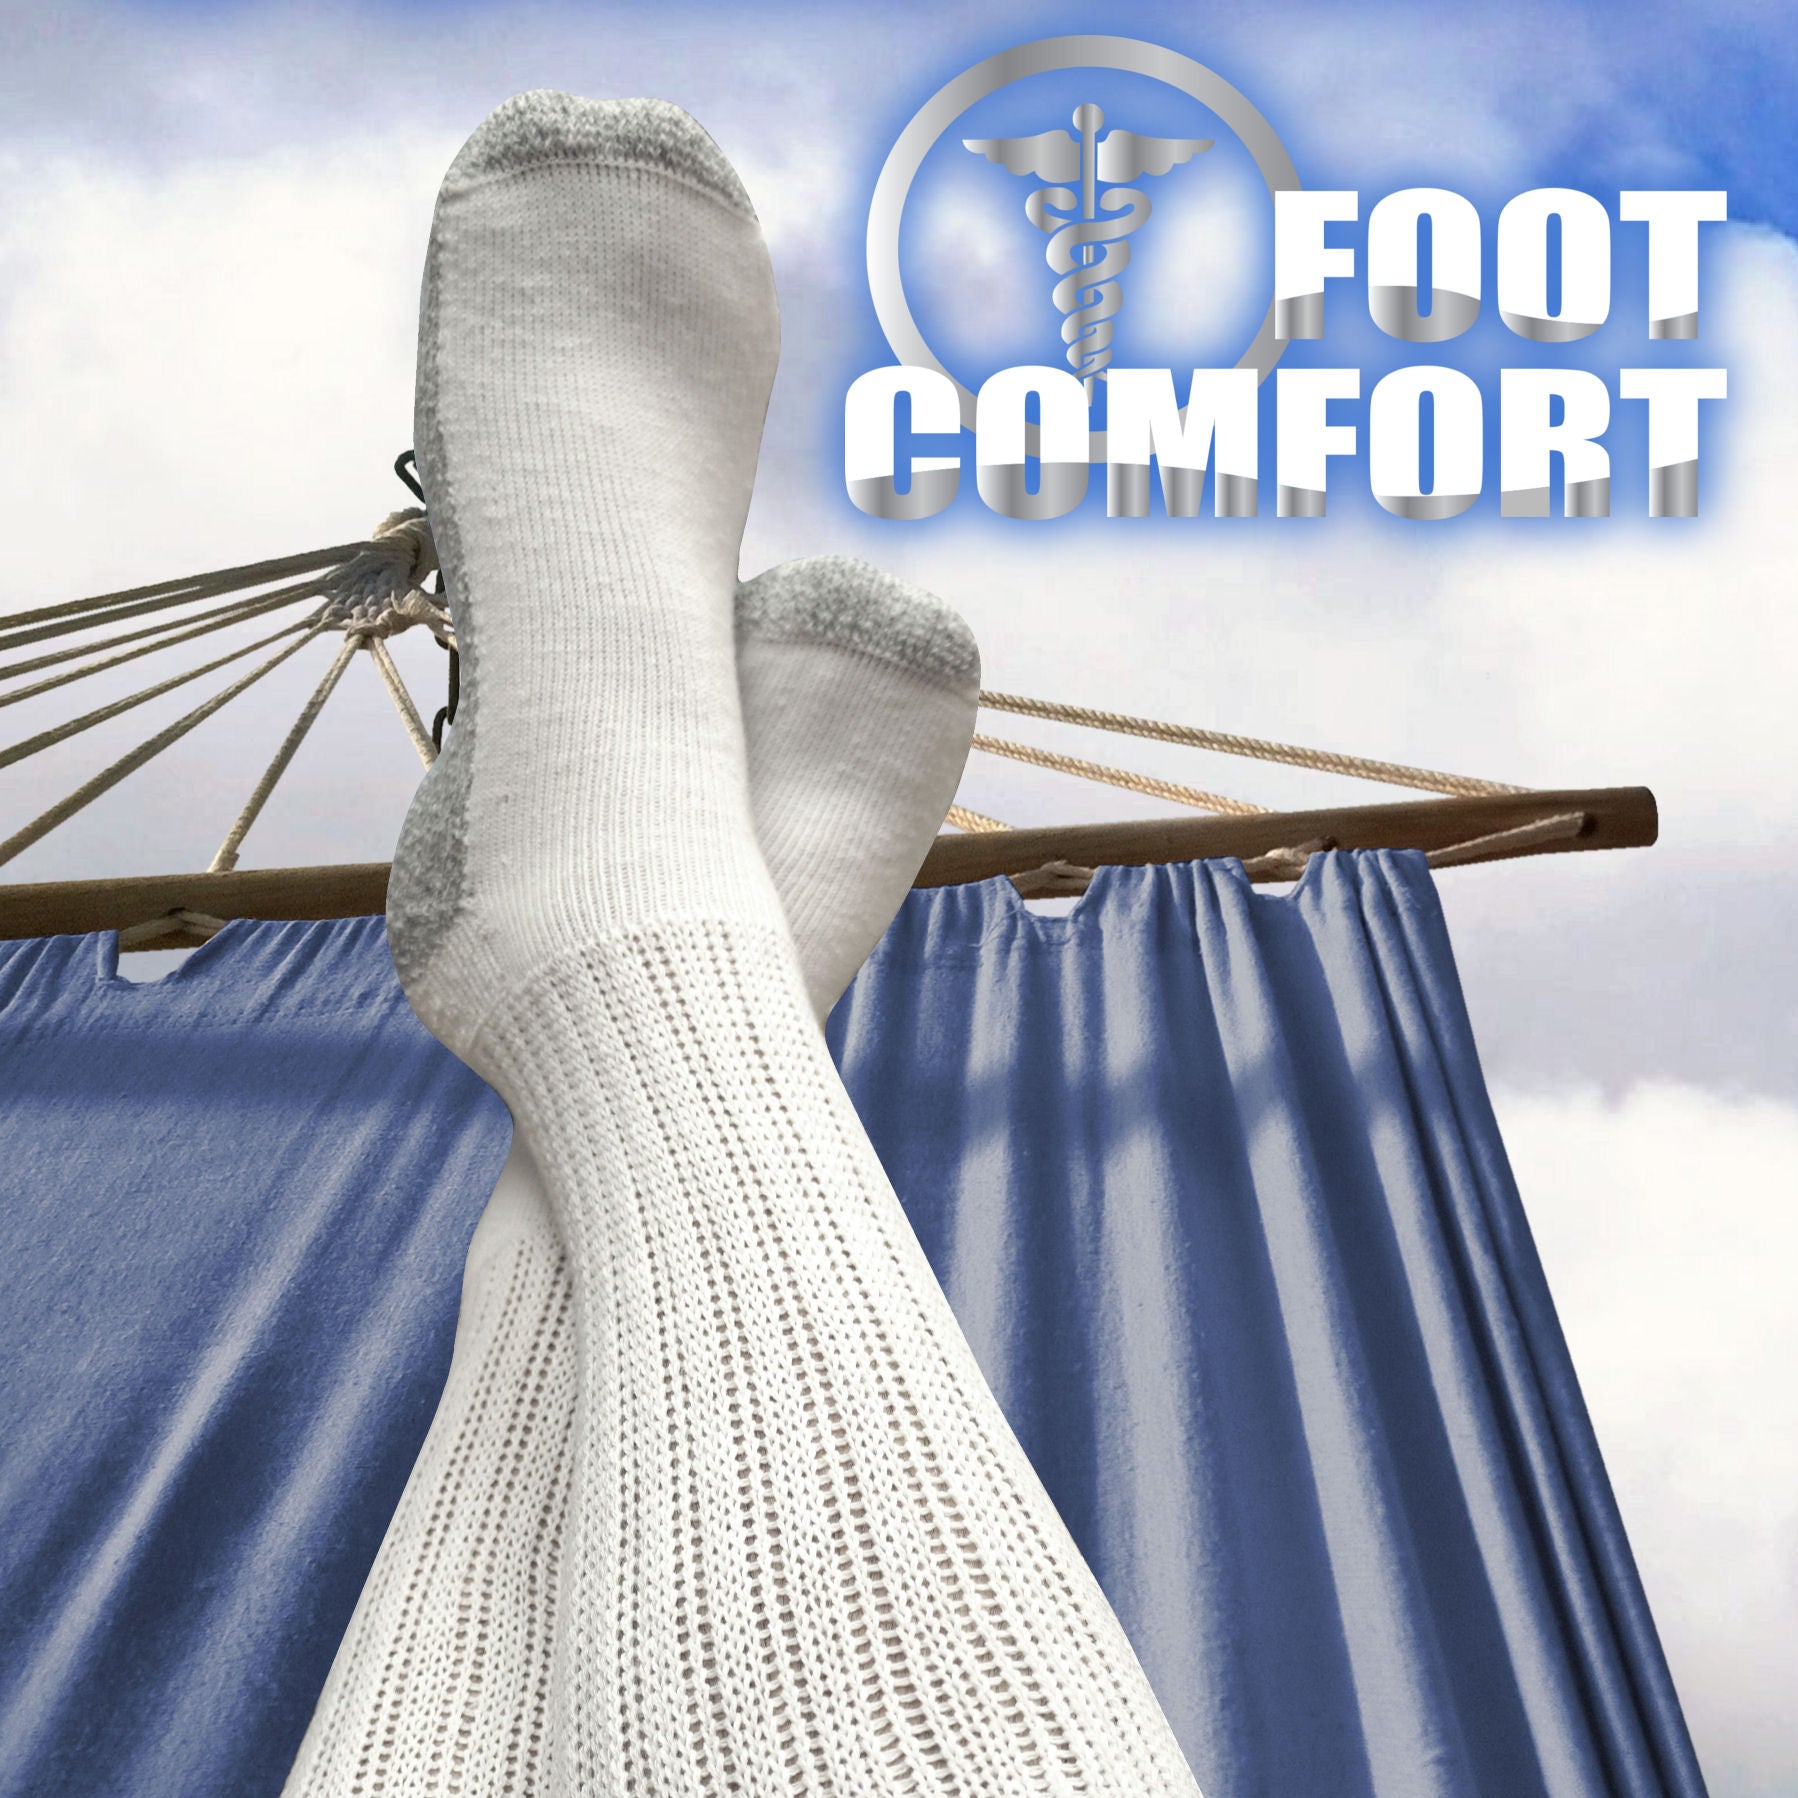 Foot Comfort, Bring Home the Comfort for the Ones You Love